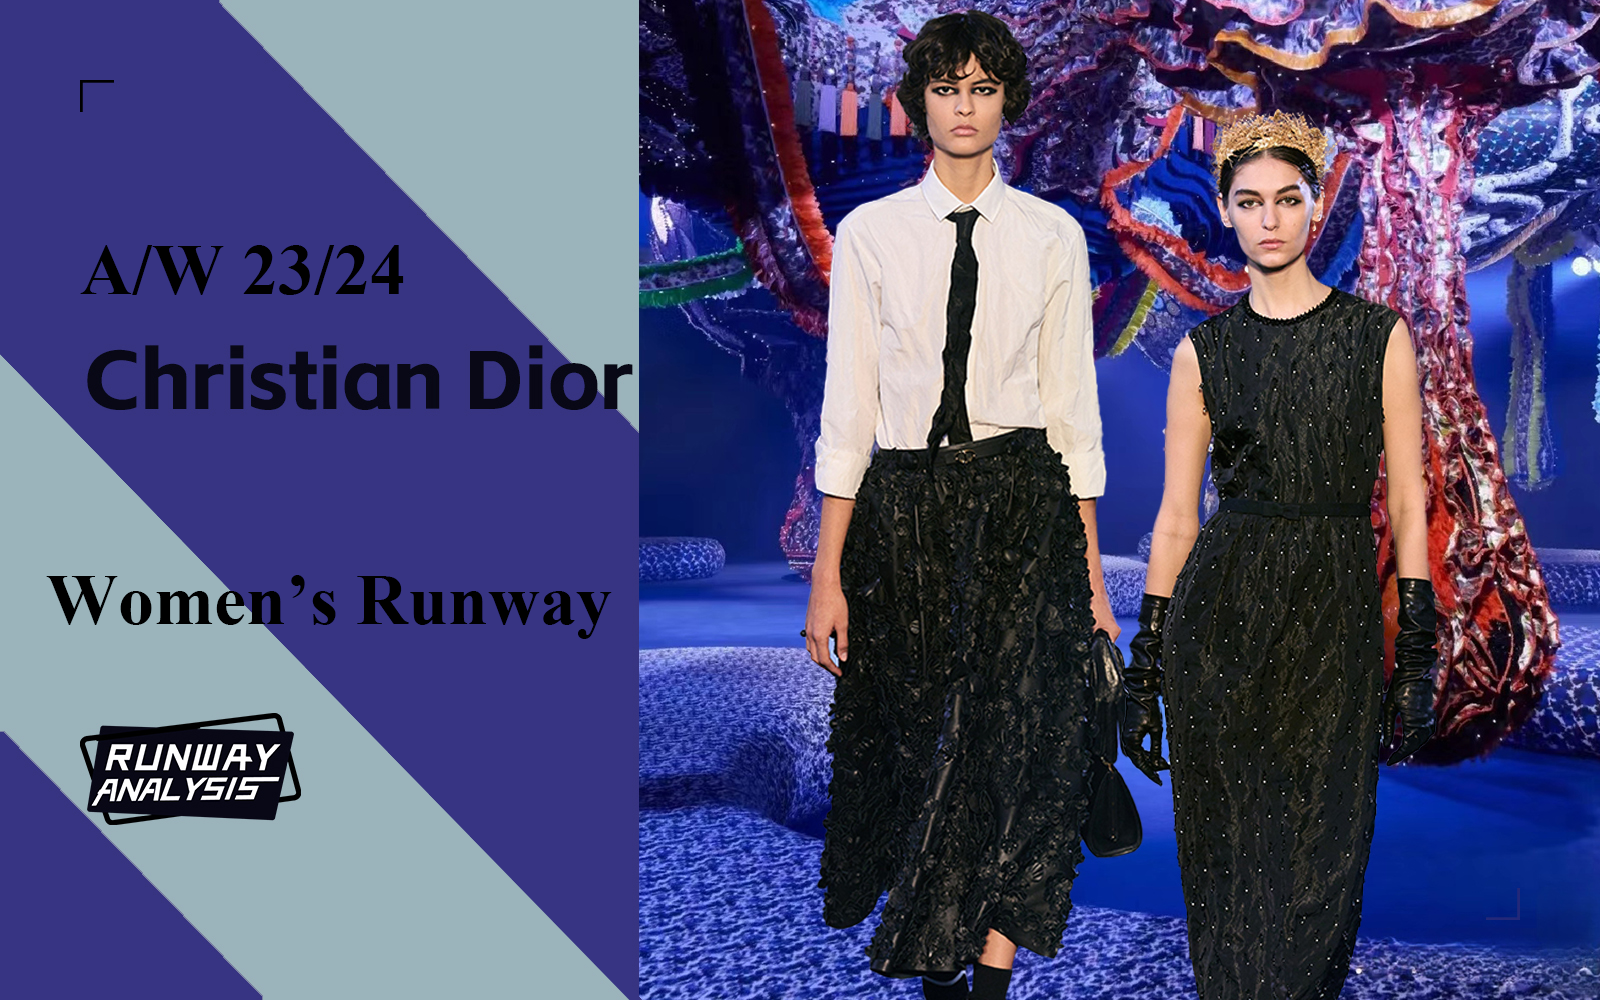 Valkyrie Miss Dior -- The Womenswear Runway Analysis of Christian Dior